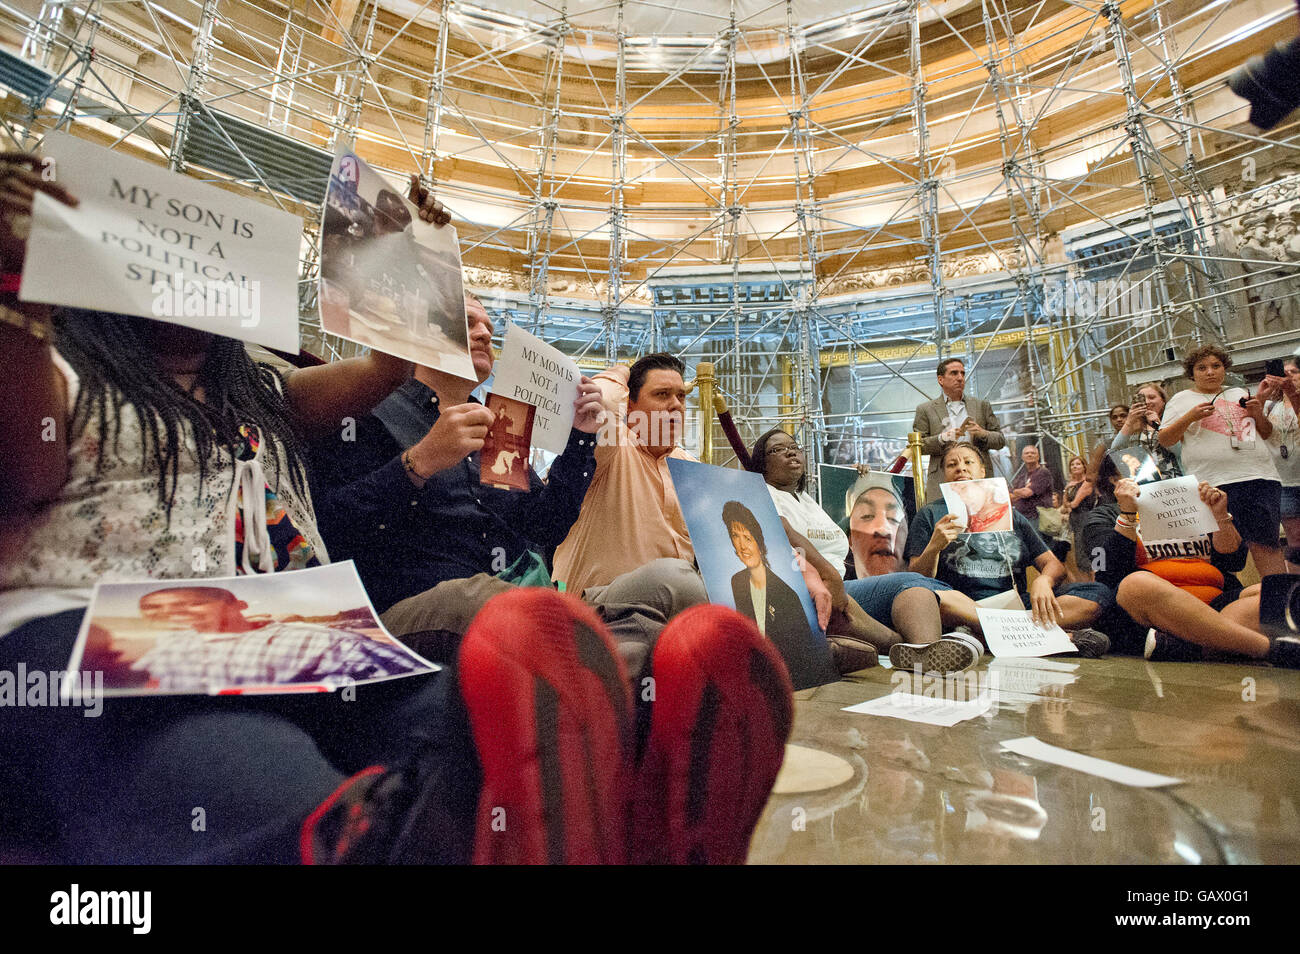 Washington, DC., USA. 5th July, 2016. Friends and family who have lost loved ones to gun violence stage a sit-in in the rotunda of the U.S. Capitol Building in Washington, DC as lawmakers return after the Fourth of July Recess on Tuesday, July 5, 2016. Protesters called on Congress to take real votes on common sense solutions to gun violence, including universal background checks, and an assault weapon and high-capacity magazine ban. Credit:  dpa picture alliance/Alamy Live News Stock Photo